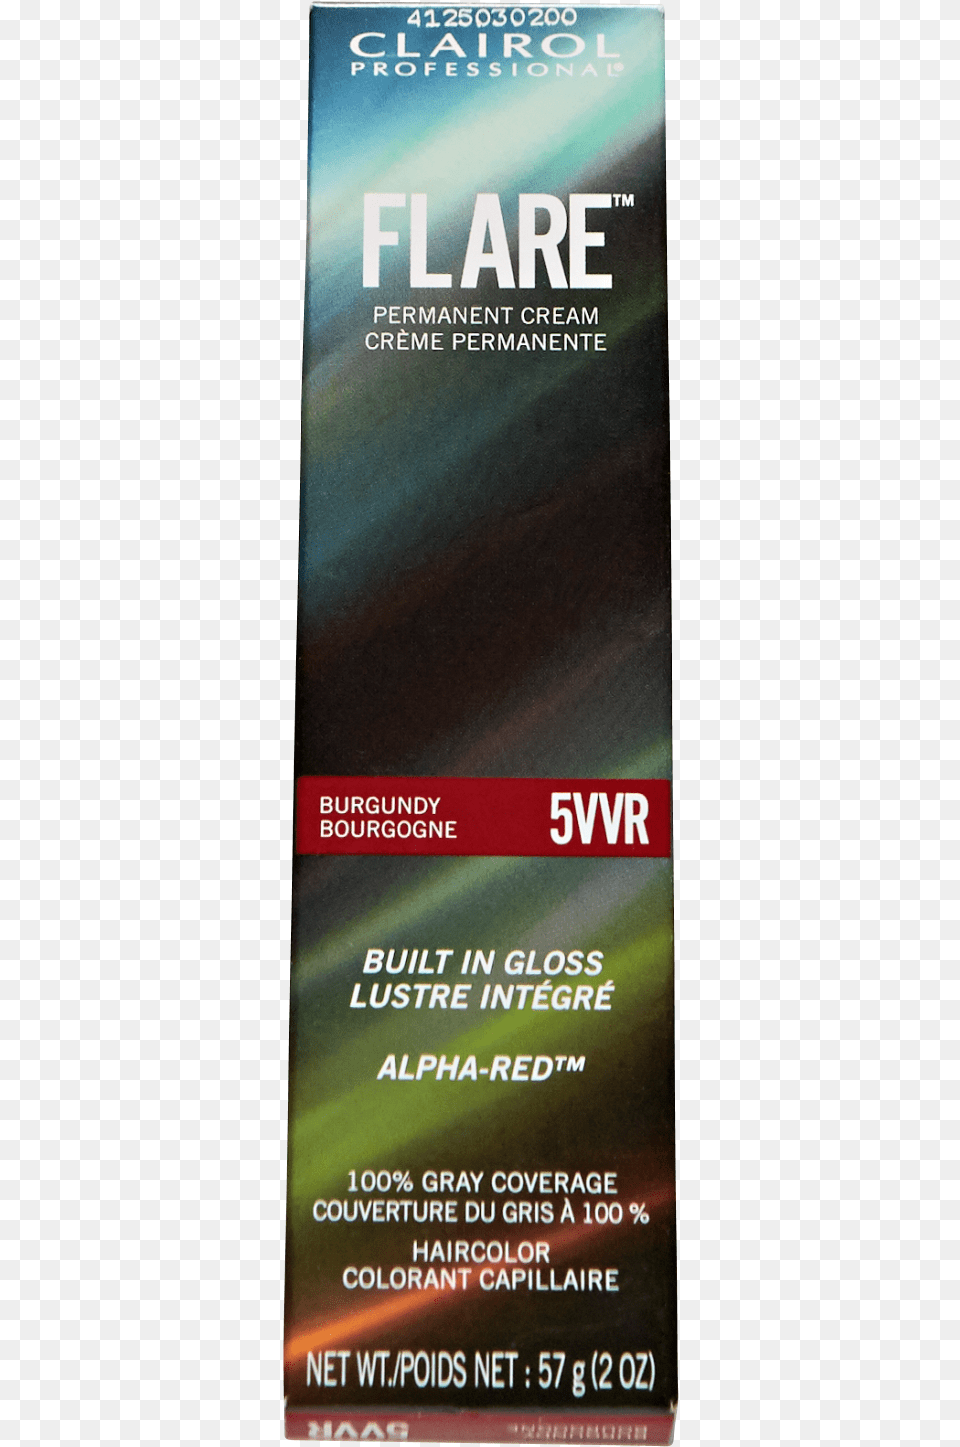 Clairol Professional Flare Burgundy Permanent Cream Flare Hair Color Purple, Advertisement, Book, Poster, Publication Png Image